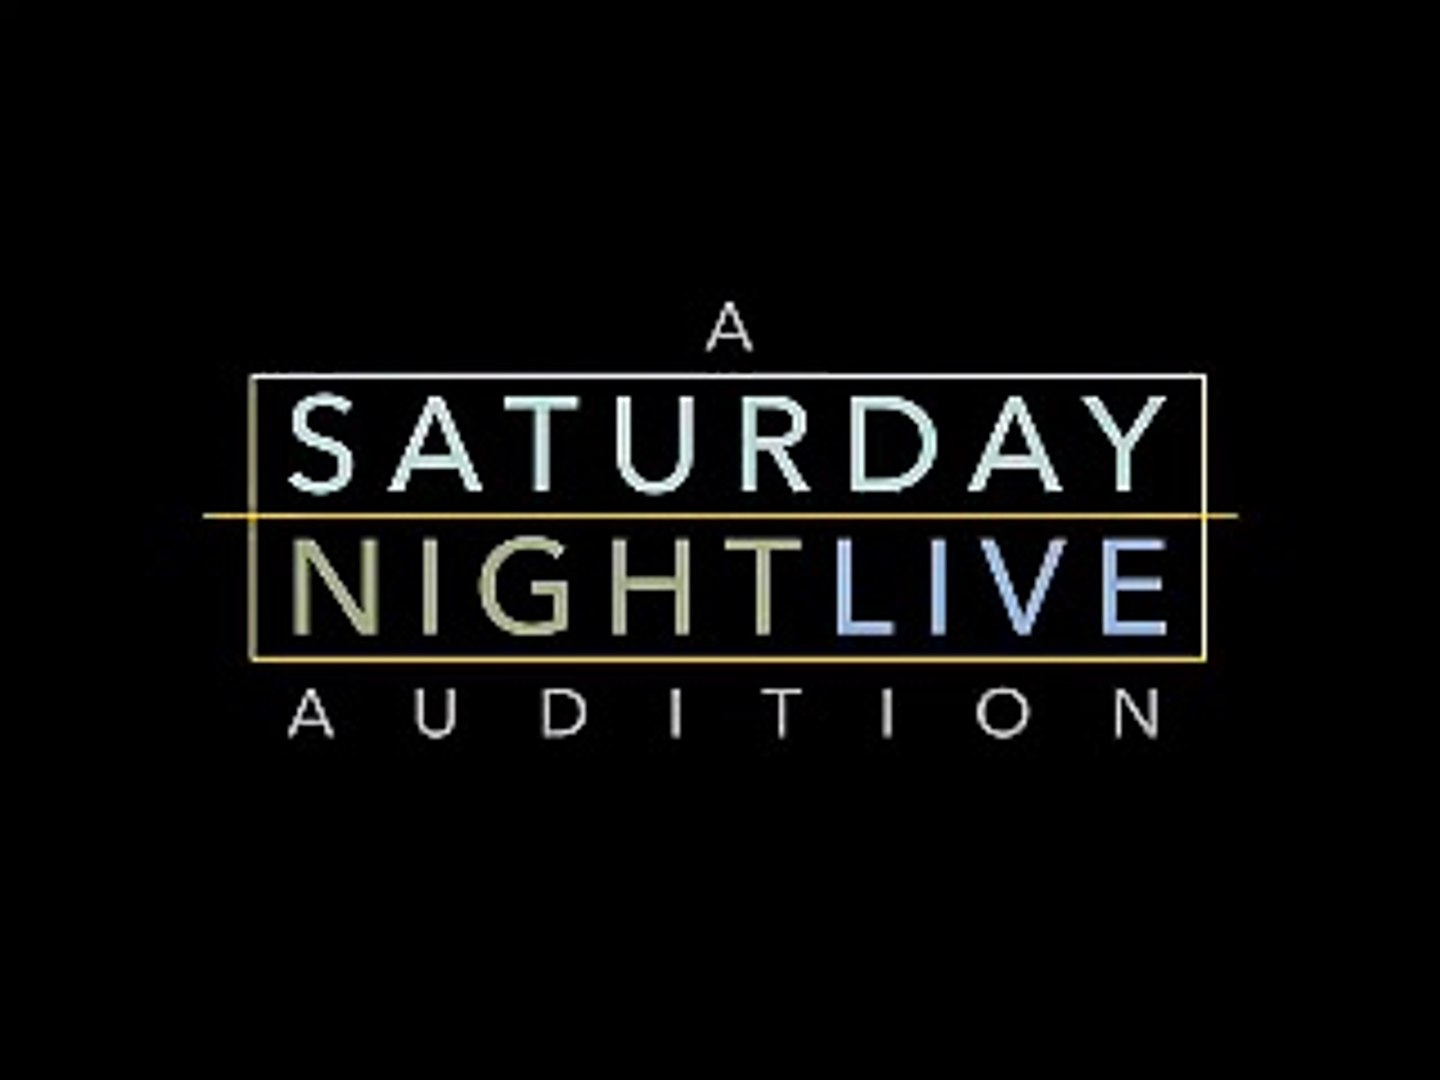 A Saturday Night Live Audition